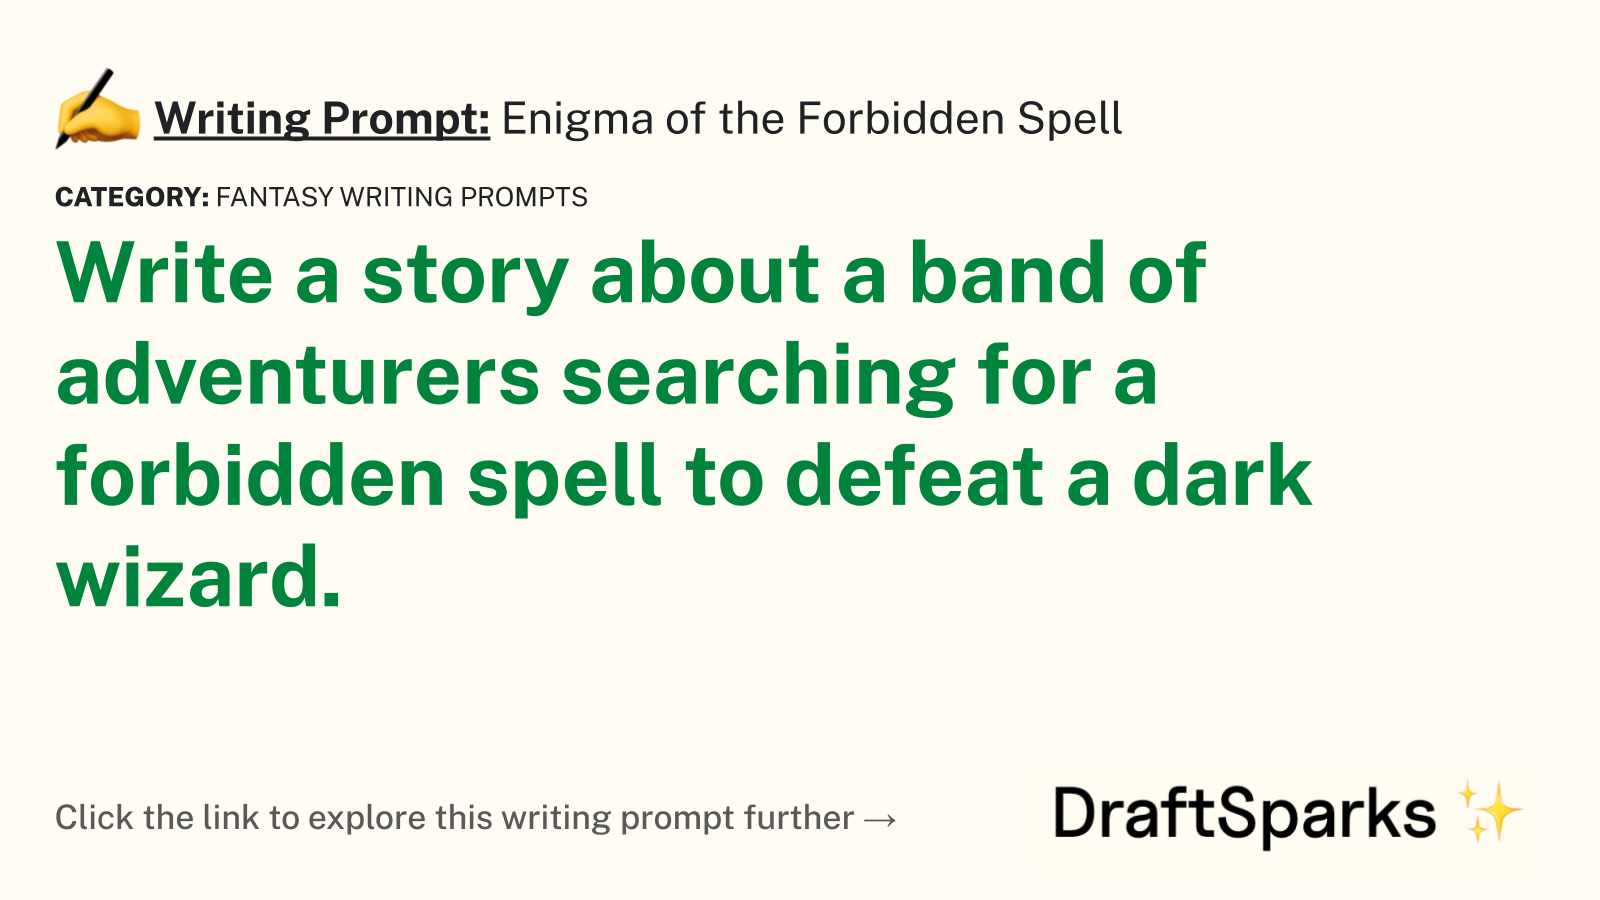 Enigma of the Forbidden Spell